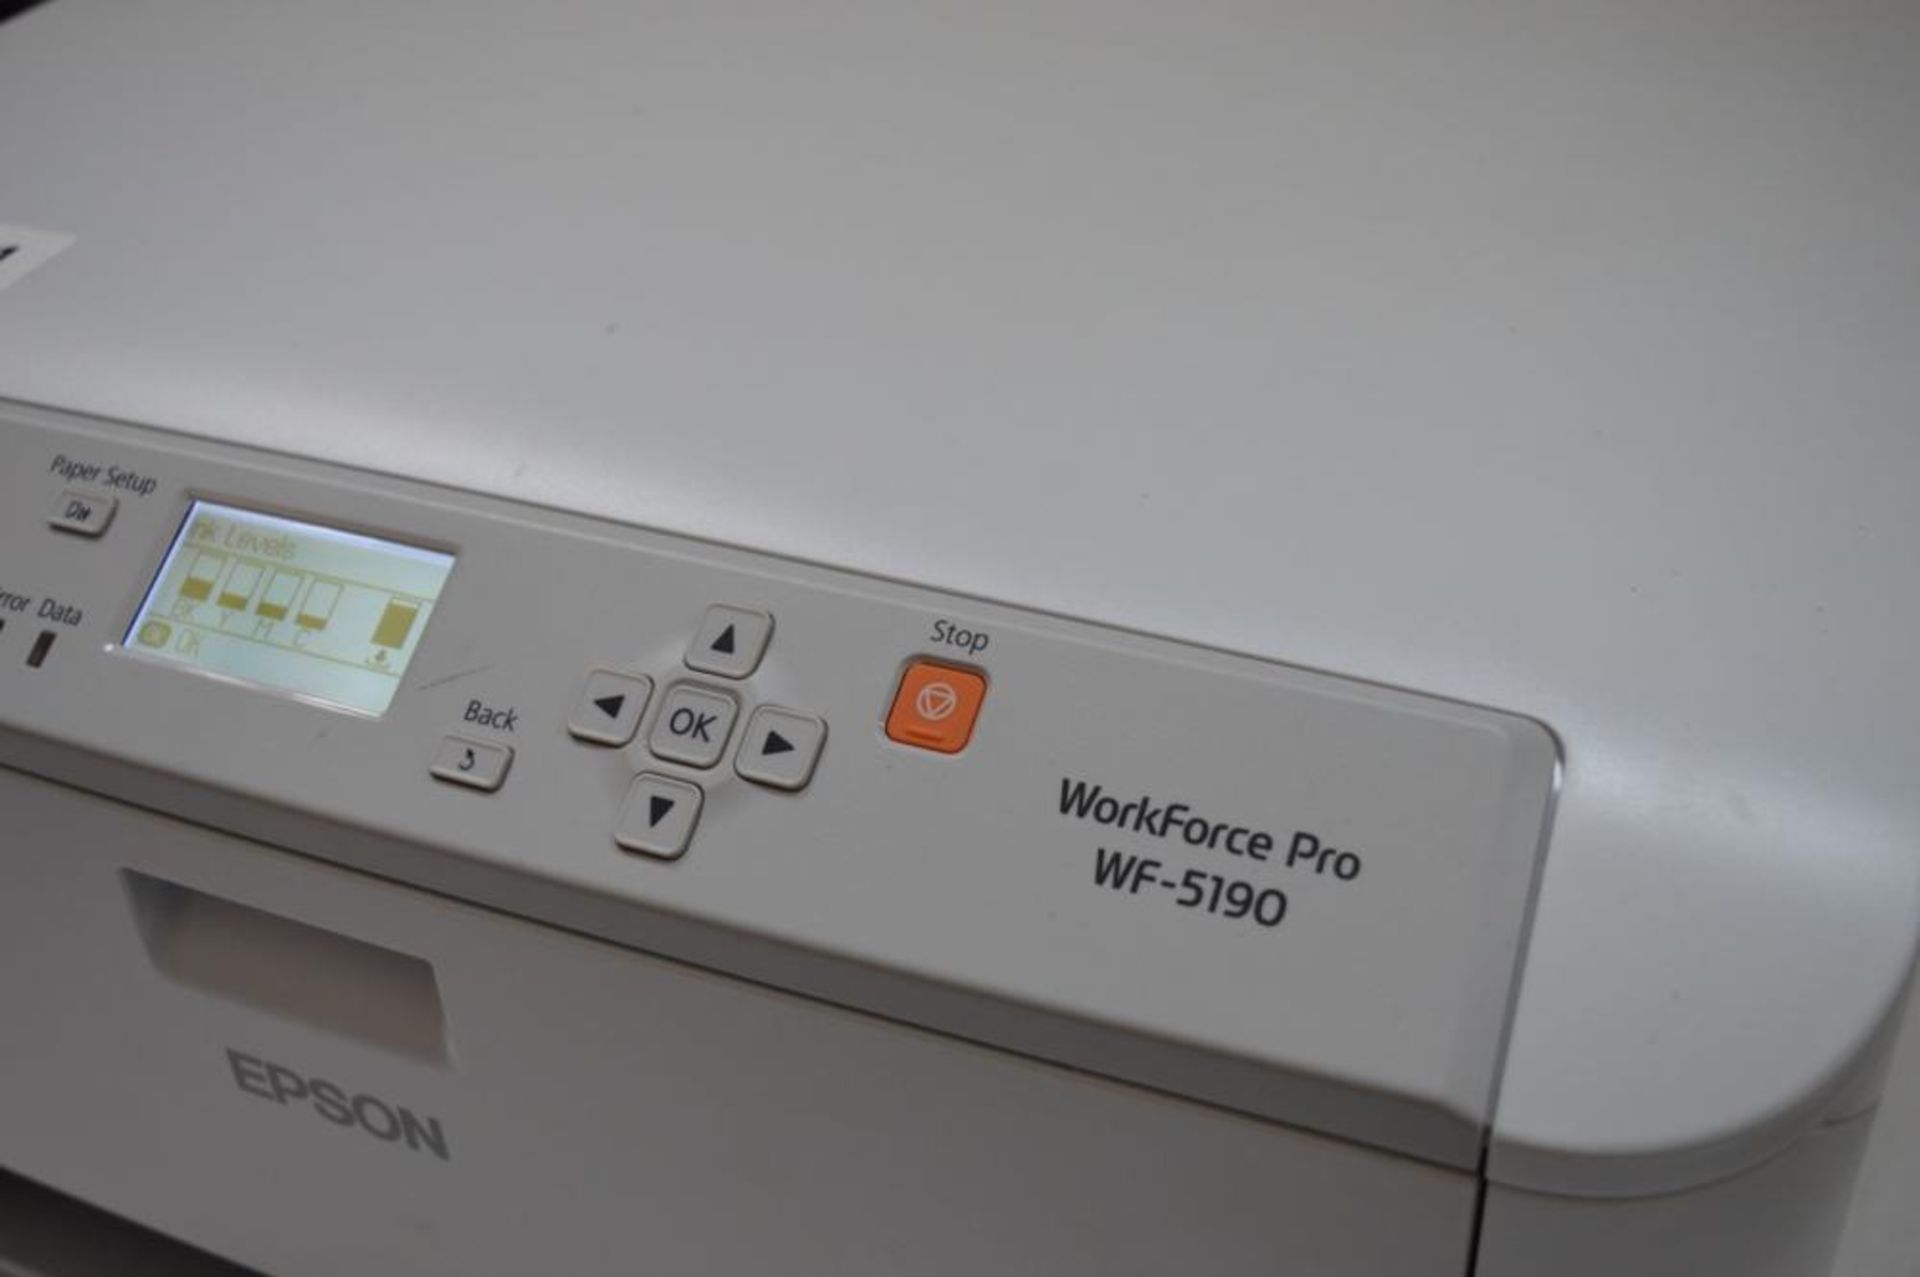 1 x Epson WorkForce Pro WF-5190 Colour Inkjet Printer - Features Include 4800x1200 dpi, 30ppm in - Image 2 of 3